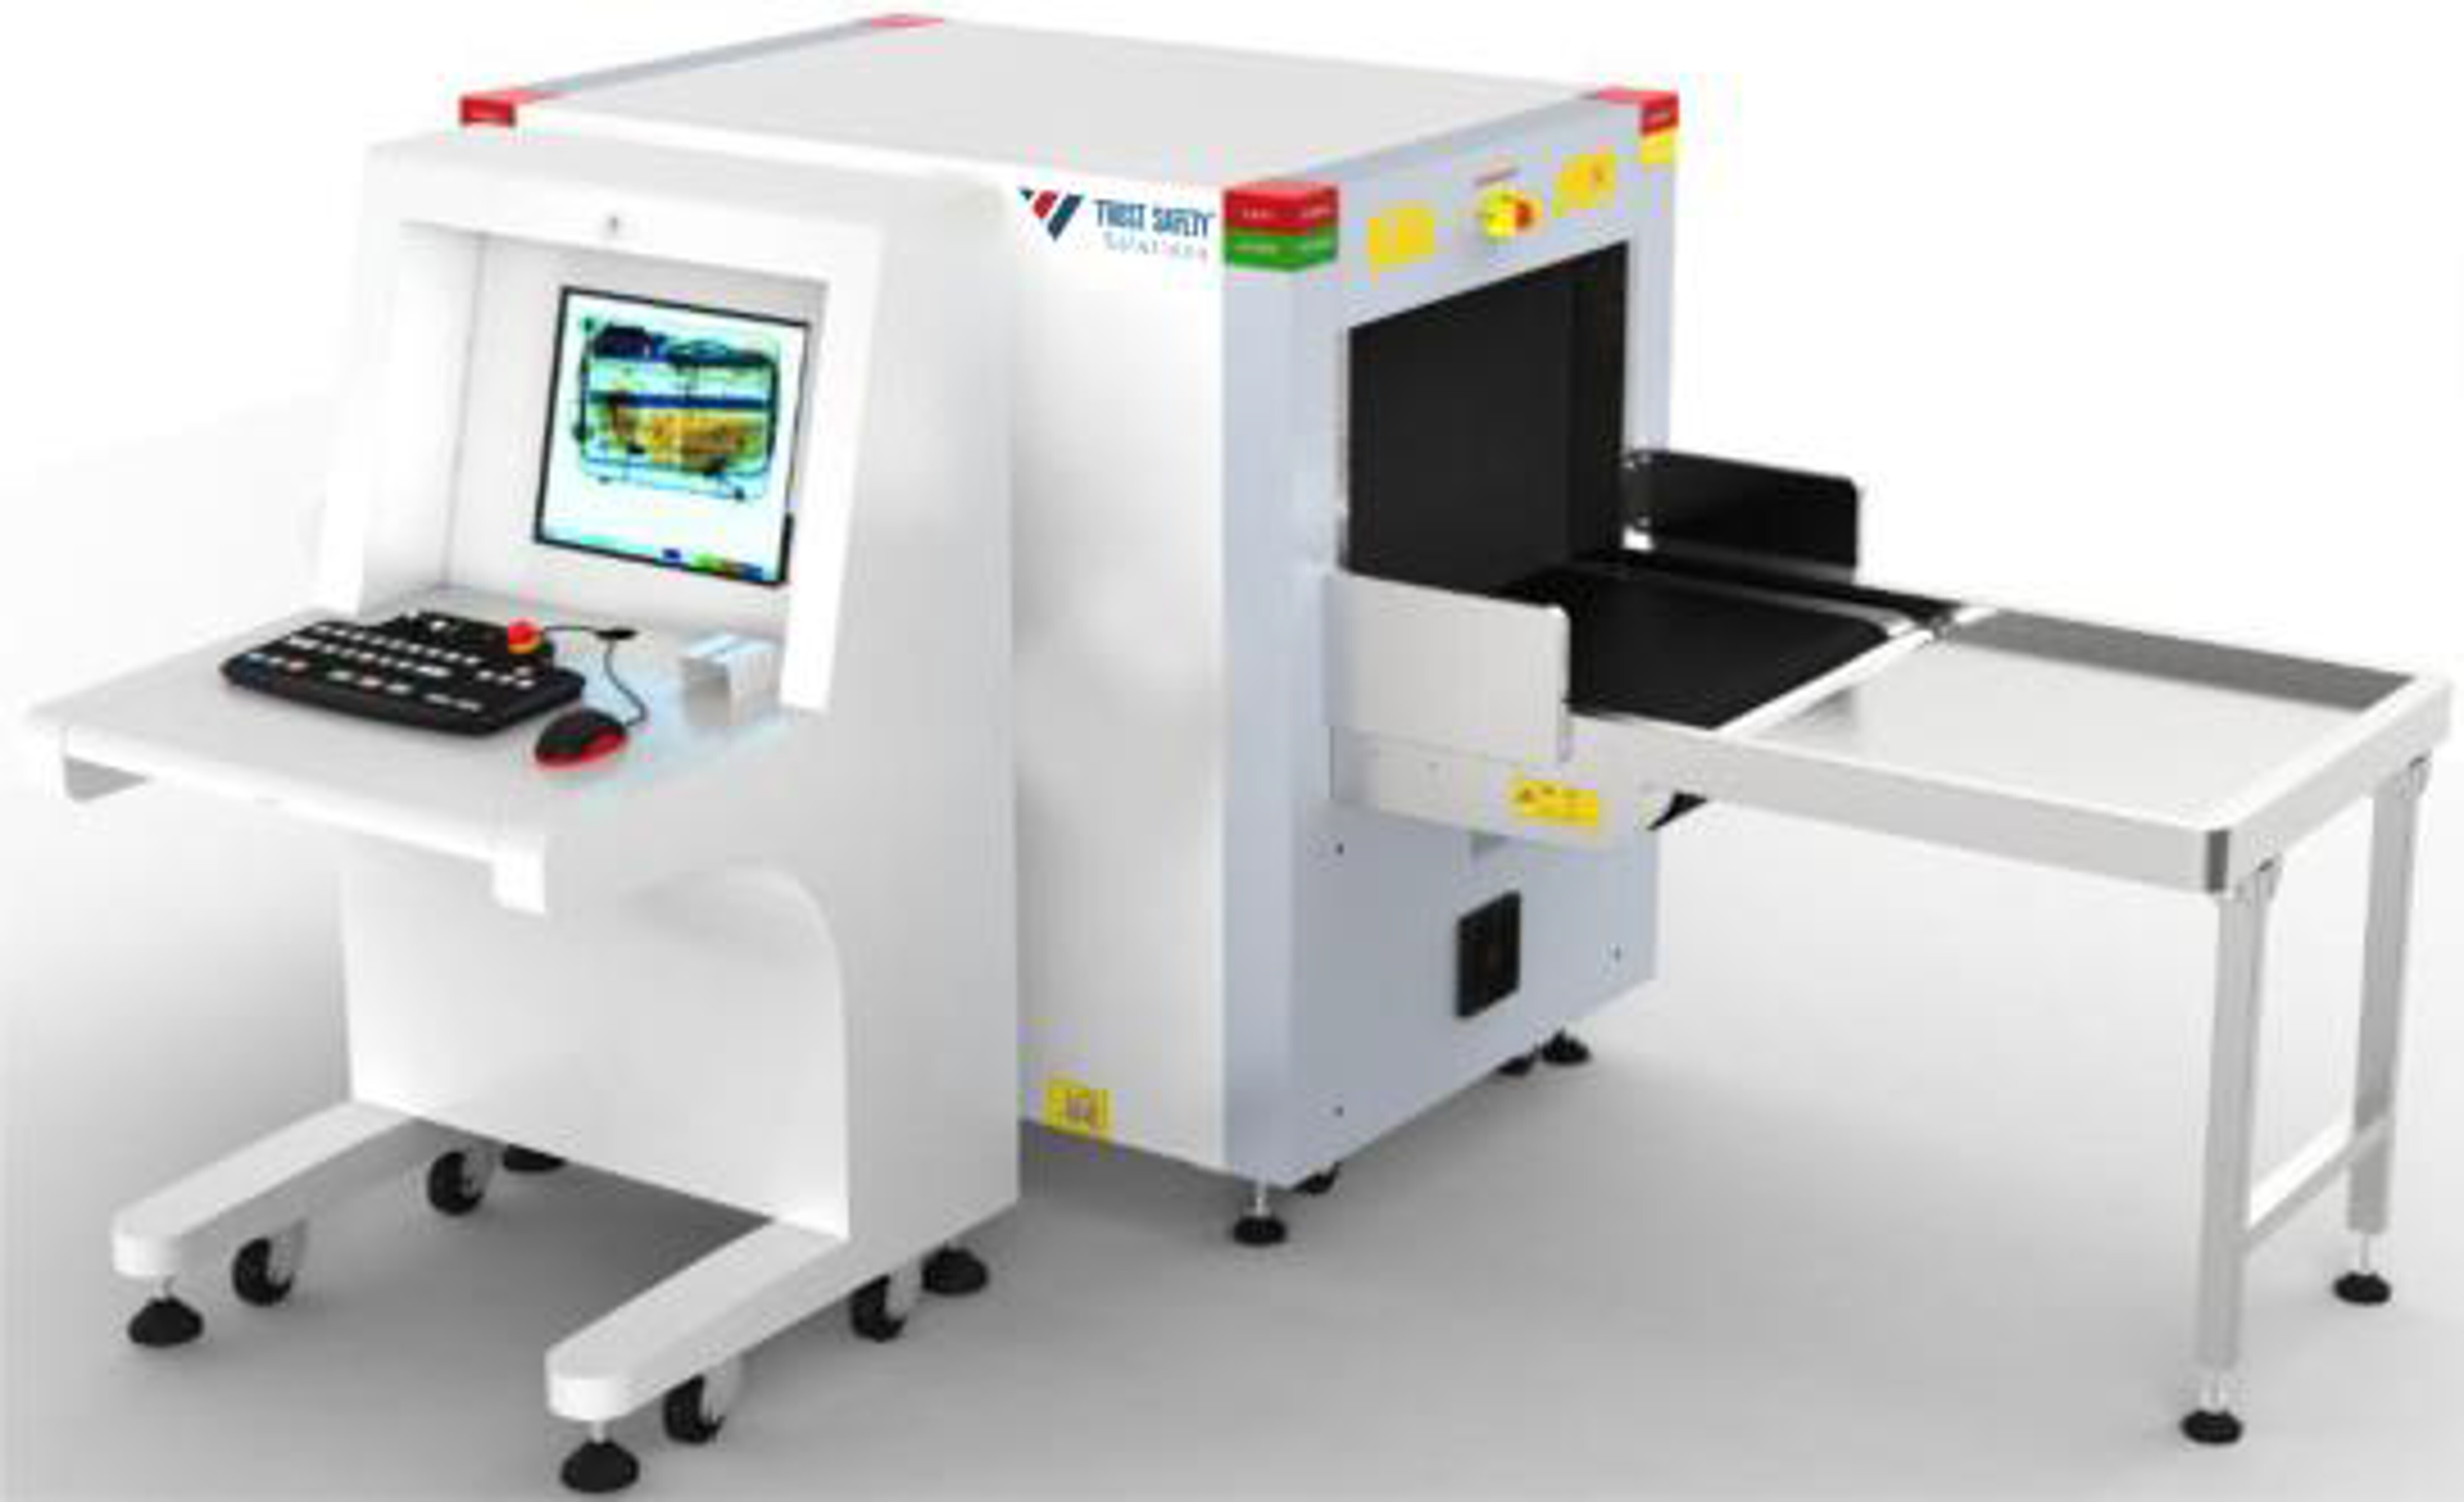 X Ray Baggage Scanner 6550- Trust Safety